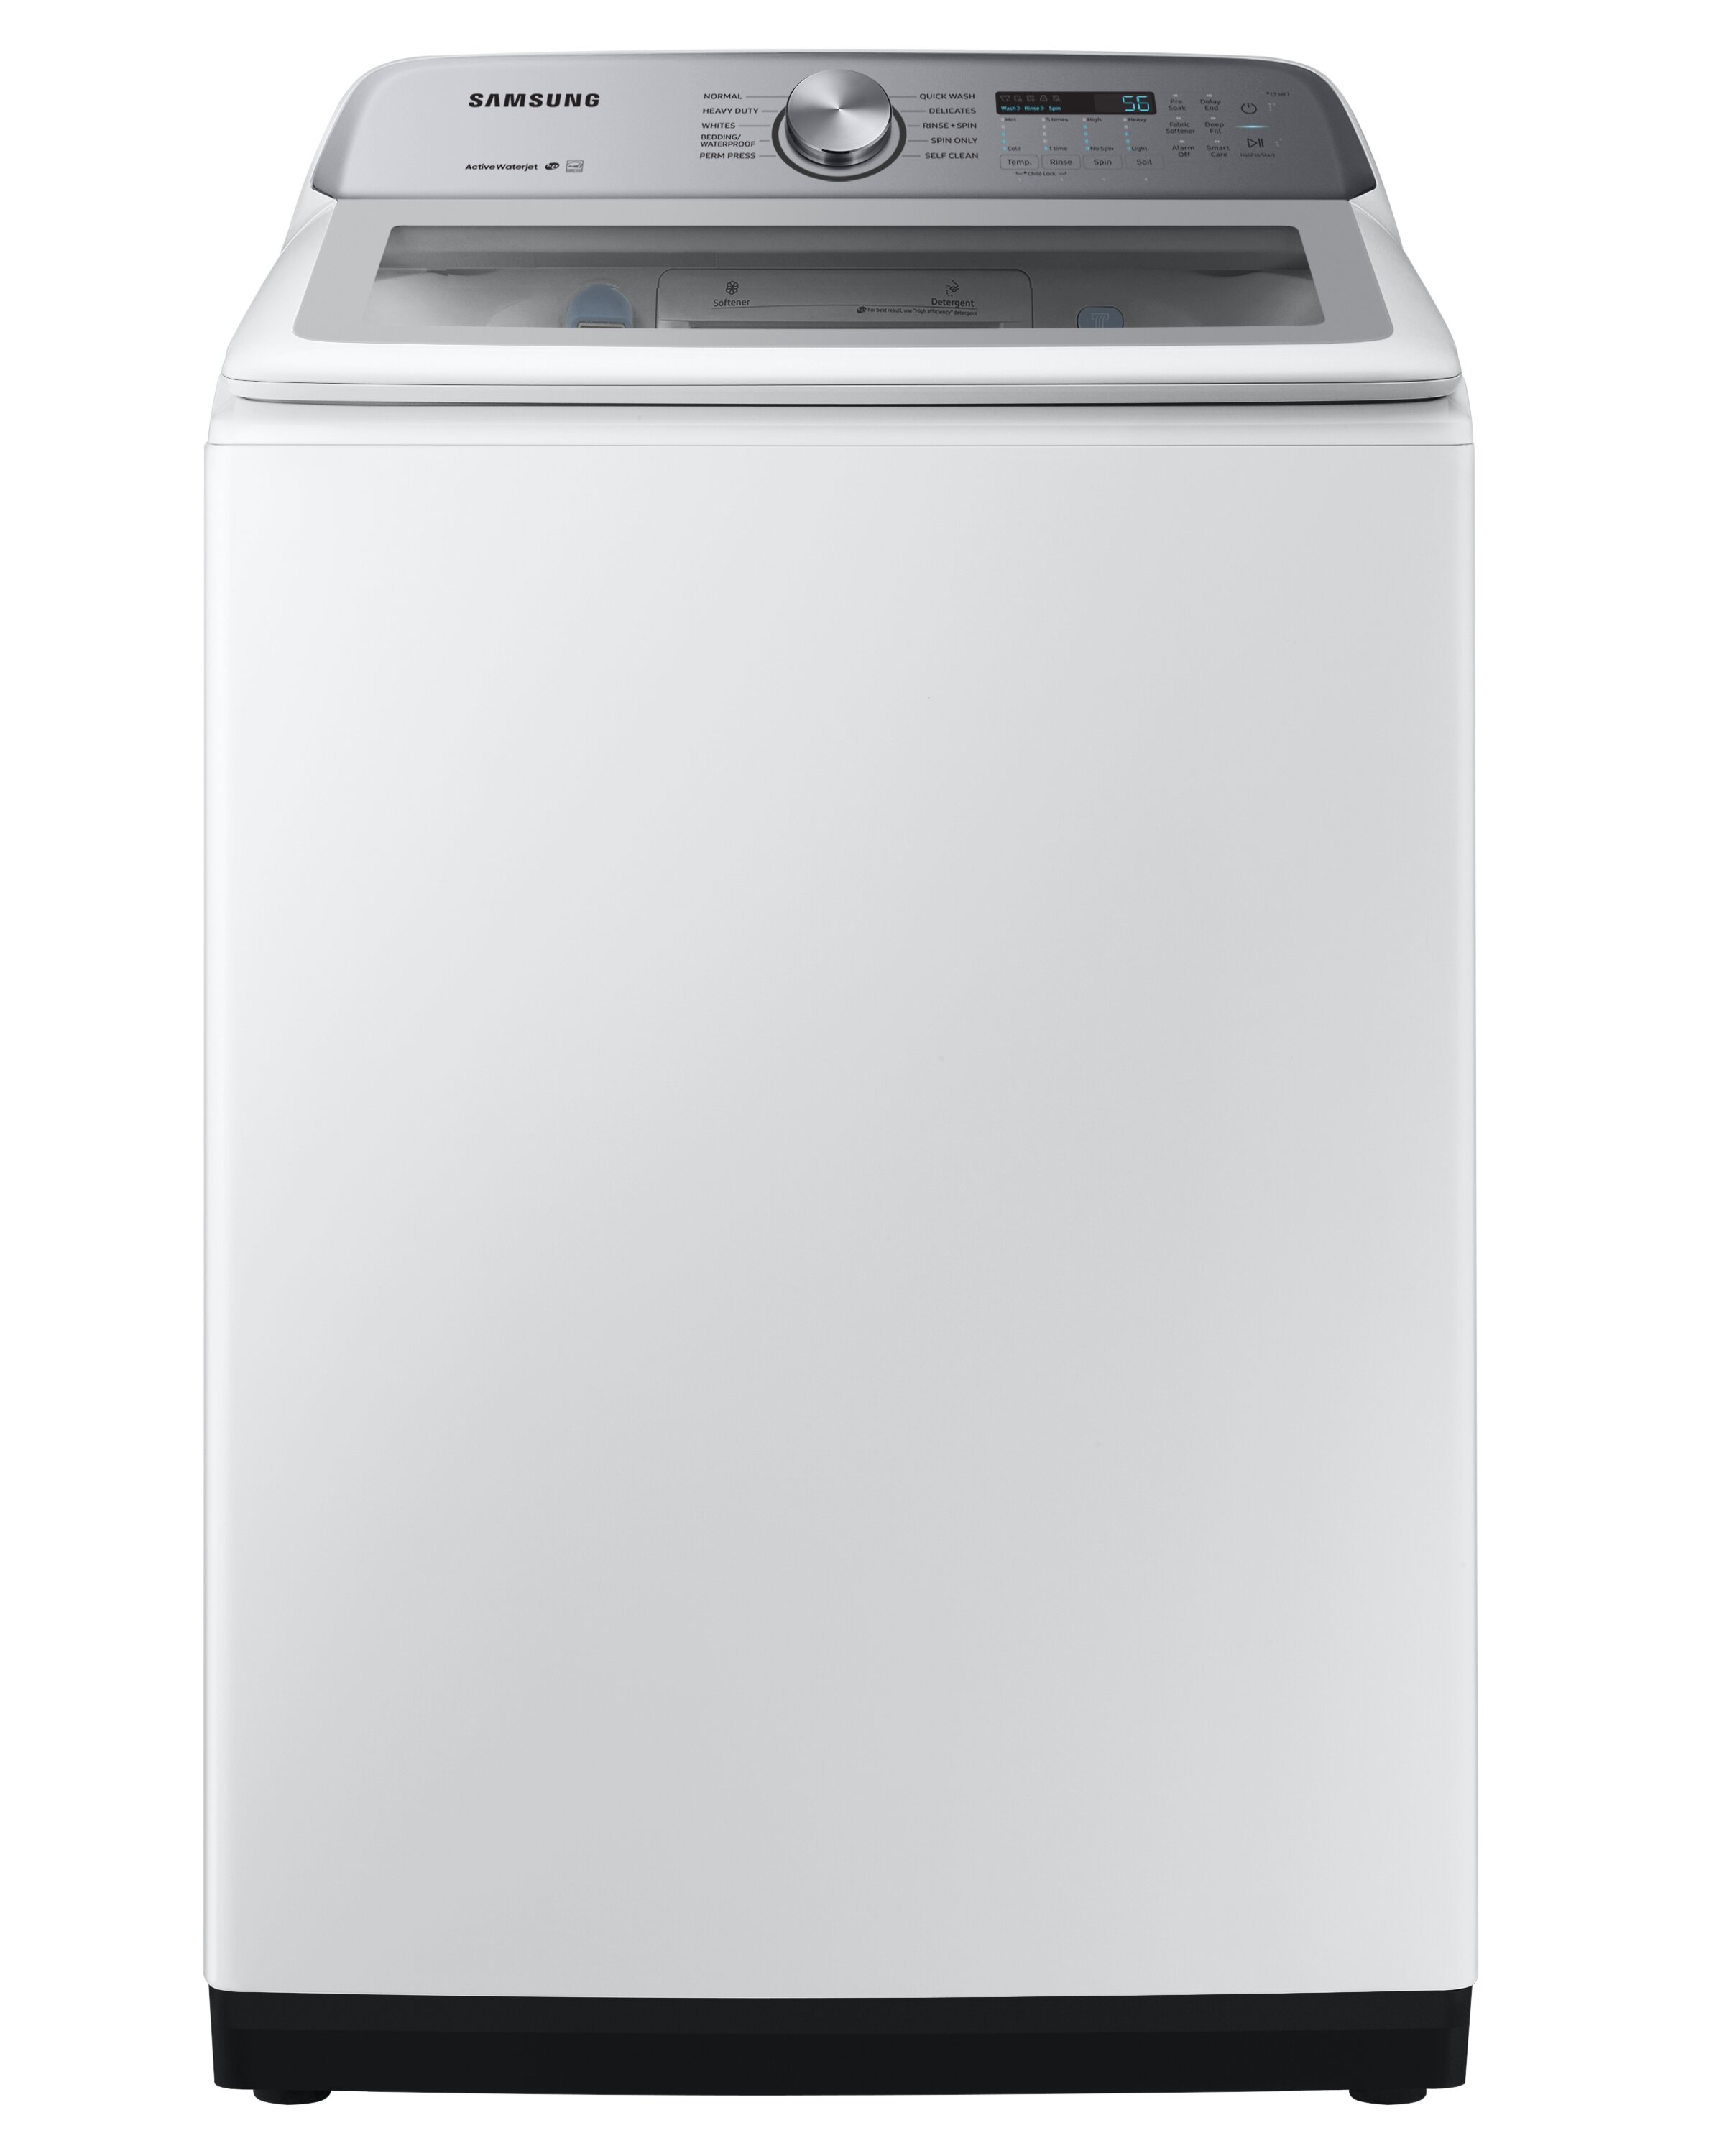 Samsung 5 0 Cu Ft Top Load Washer With Active Water Jet Reviews Wayfair,Pre Mixed Margaritas At Costco